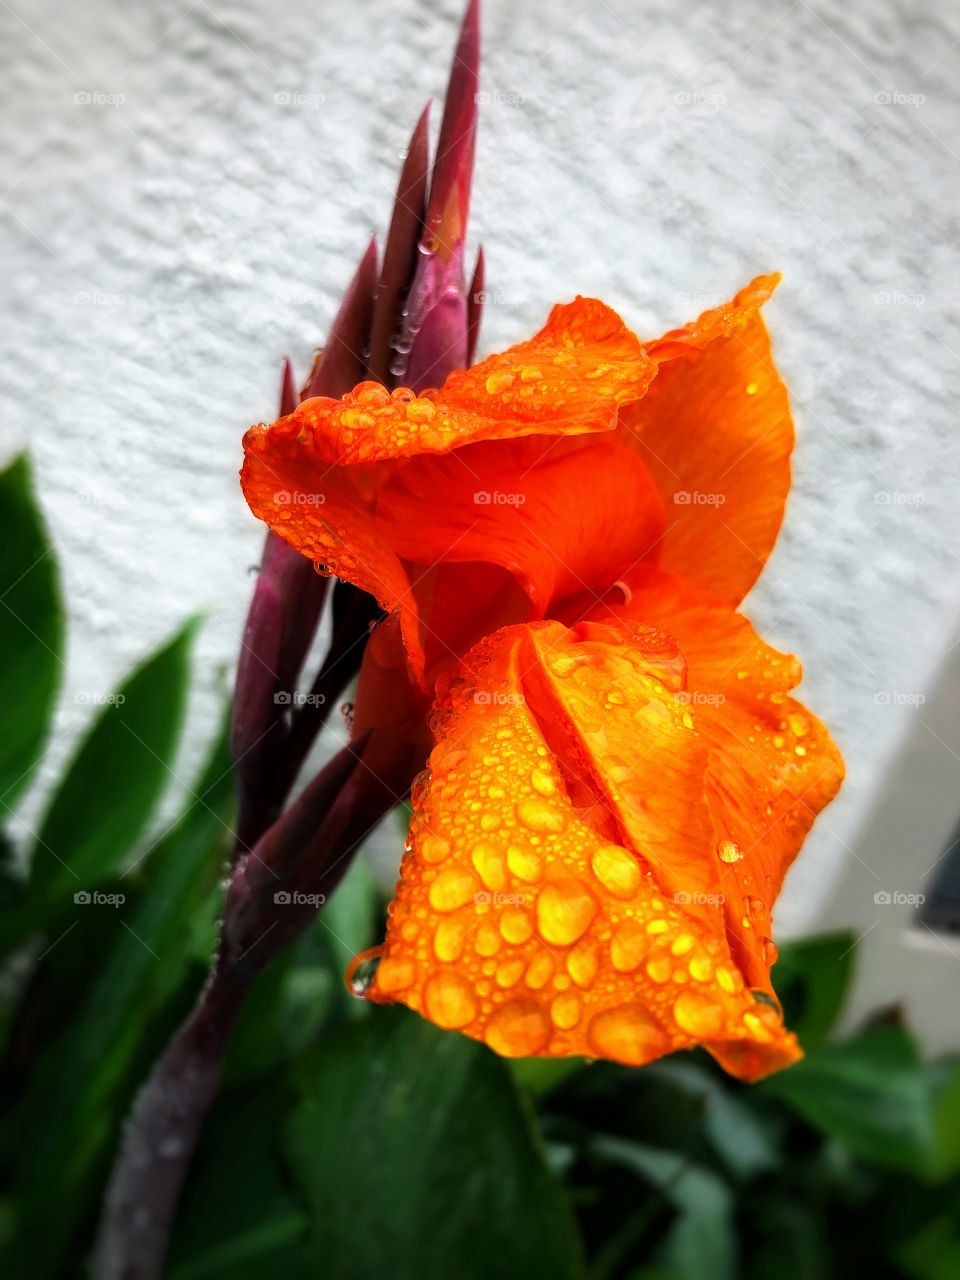 After the rain. This flower is living it’s last days until winter. Still vibrant!